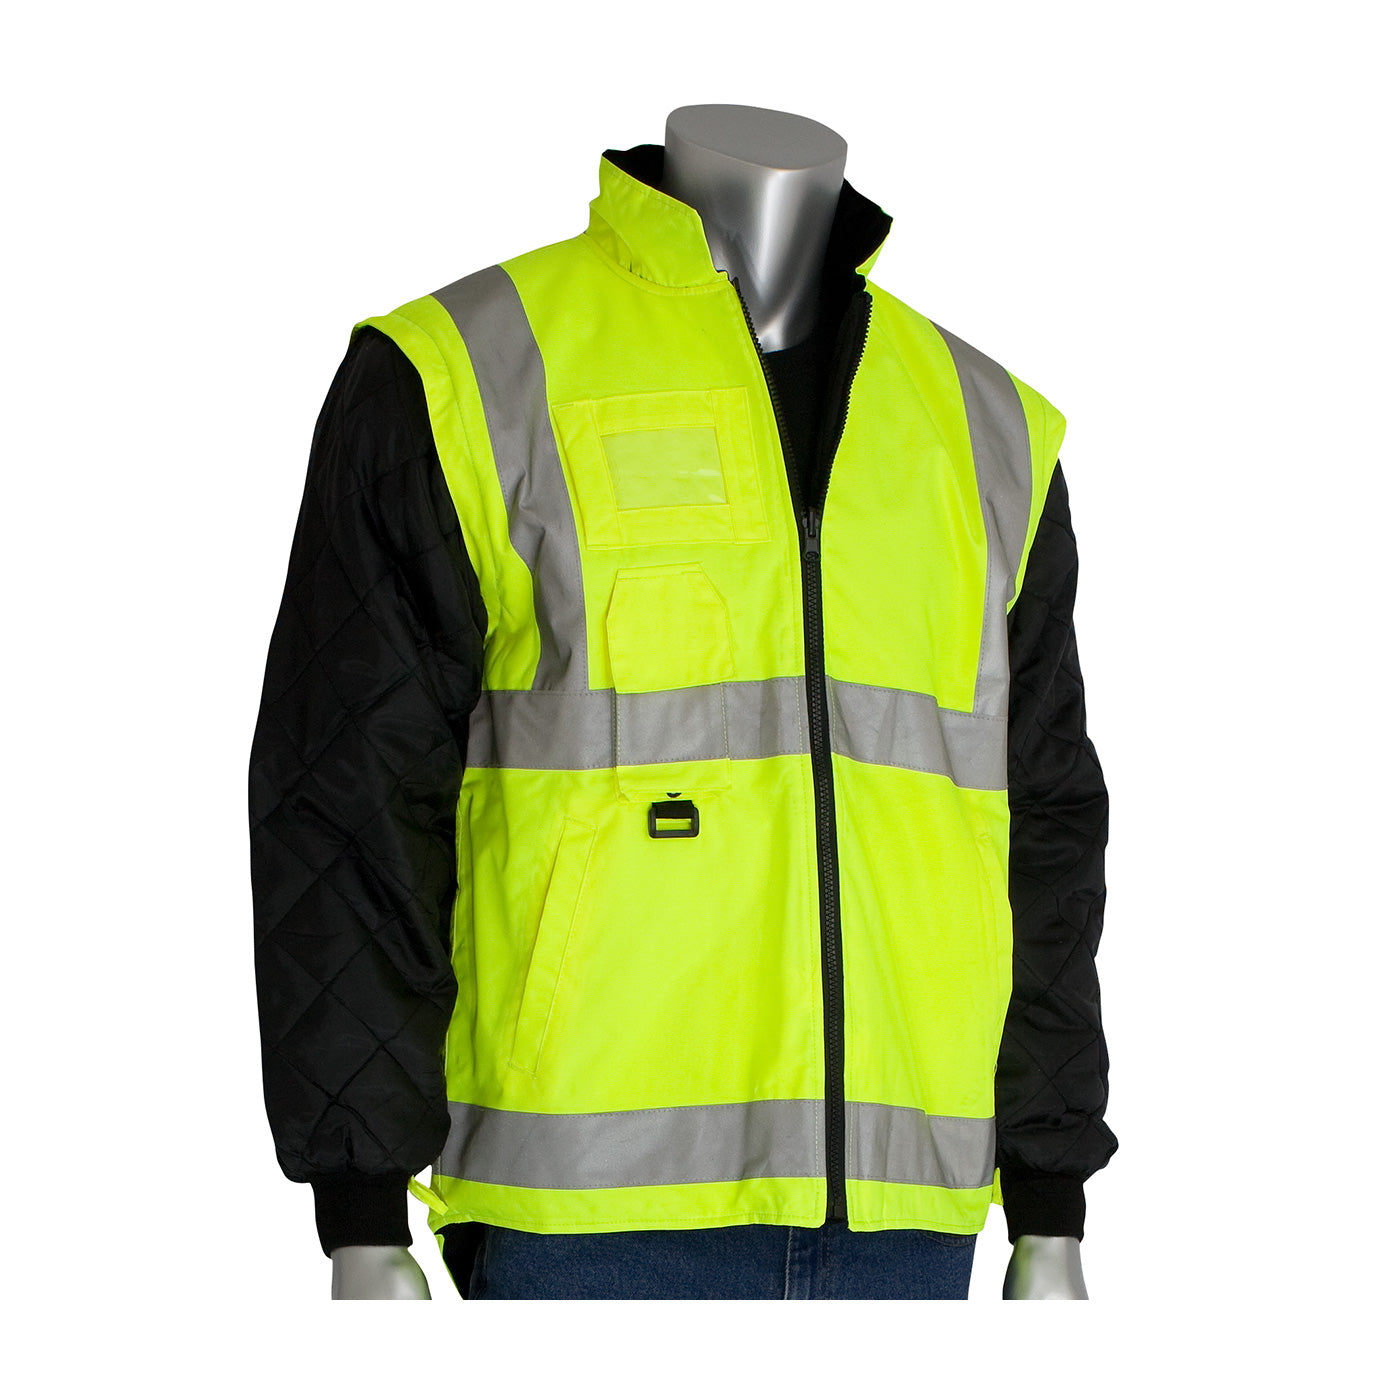 PIP 343-1756-YEL/XL ANSI Type R Class 3 7-in-1 All Conditions Coat with Inner Jacket and Vest Combination